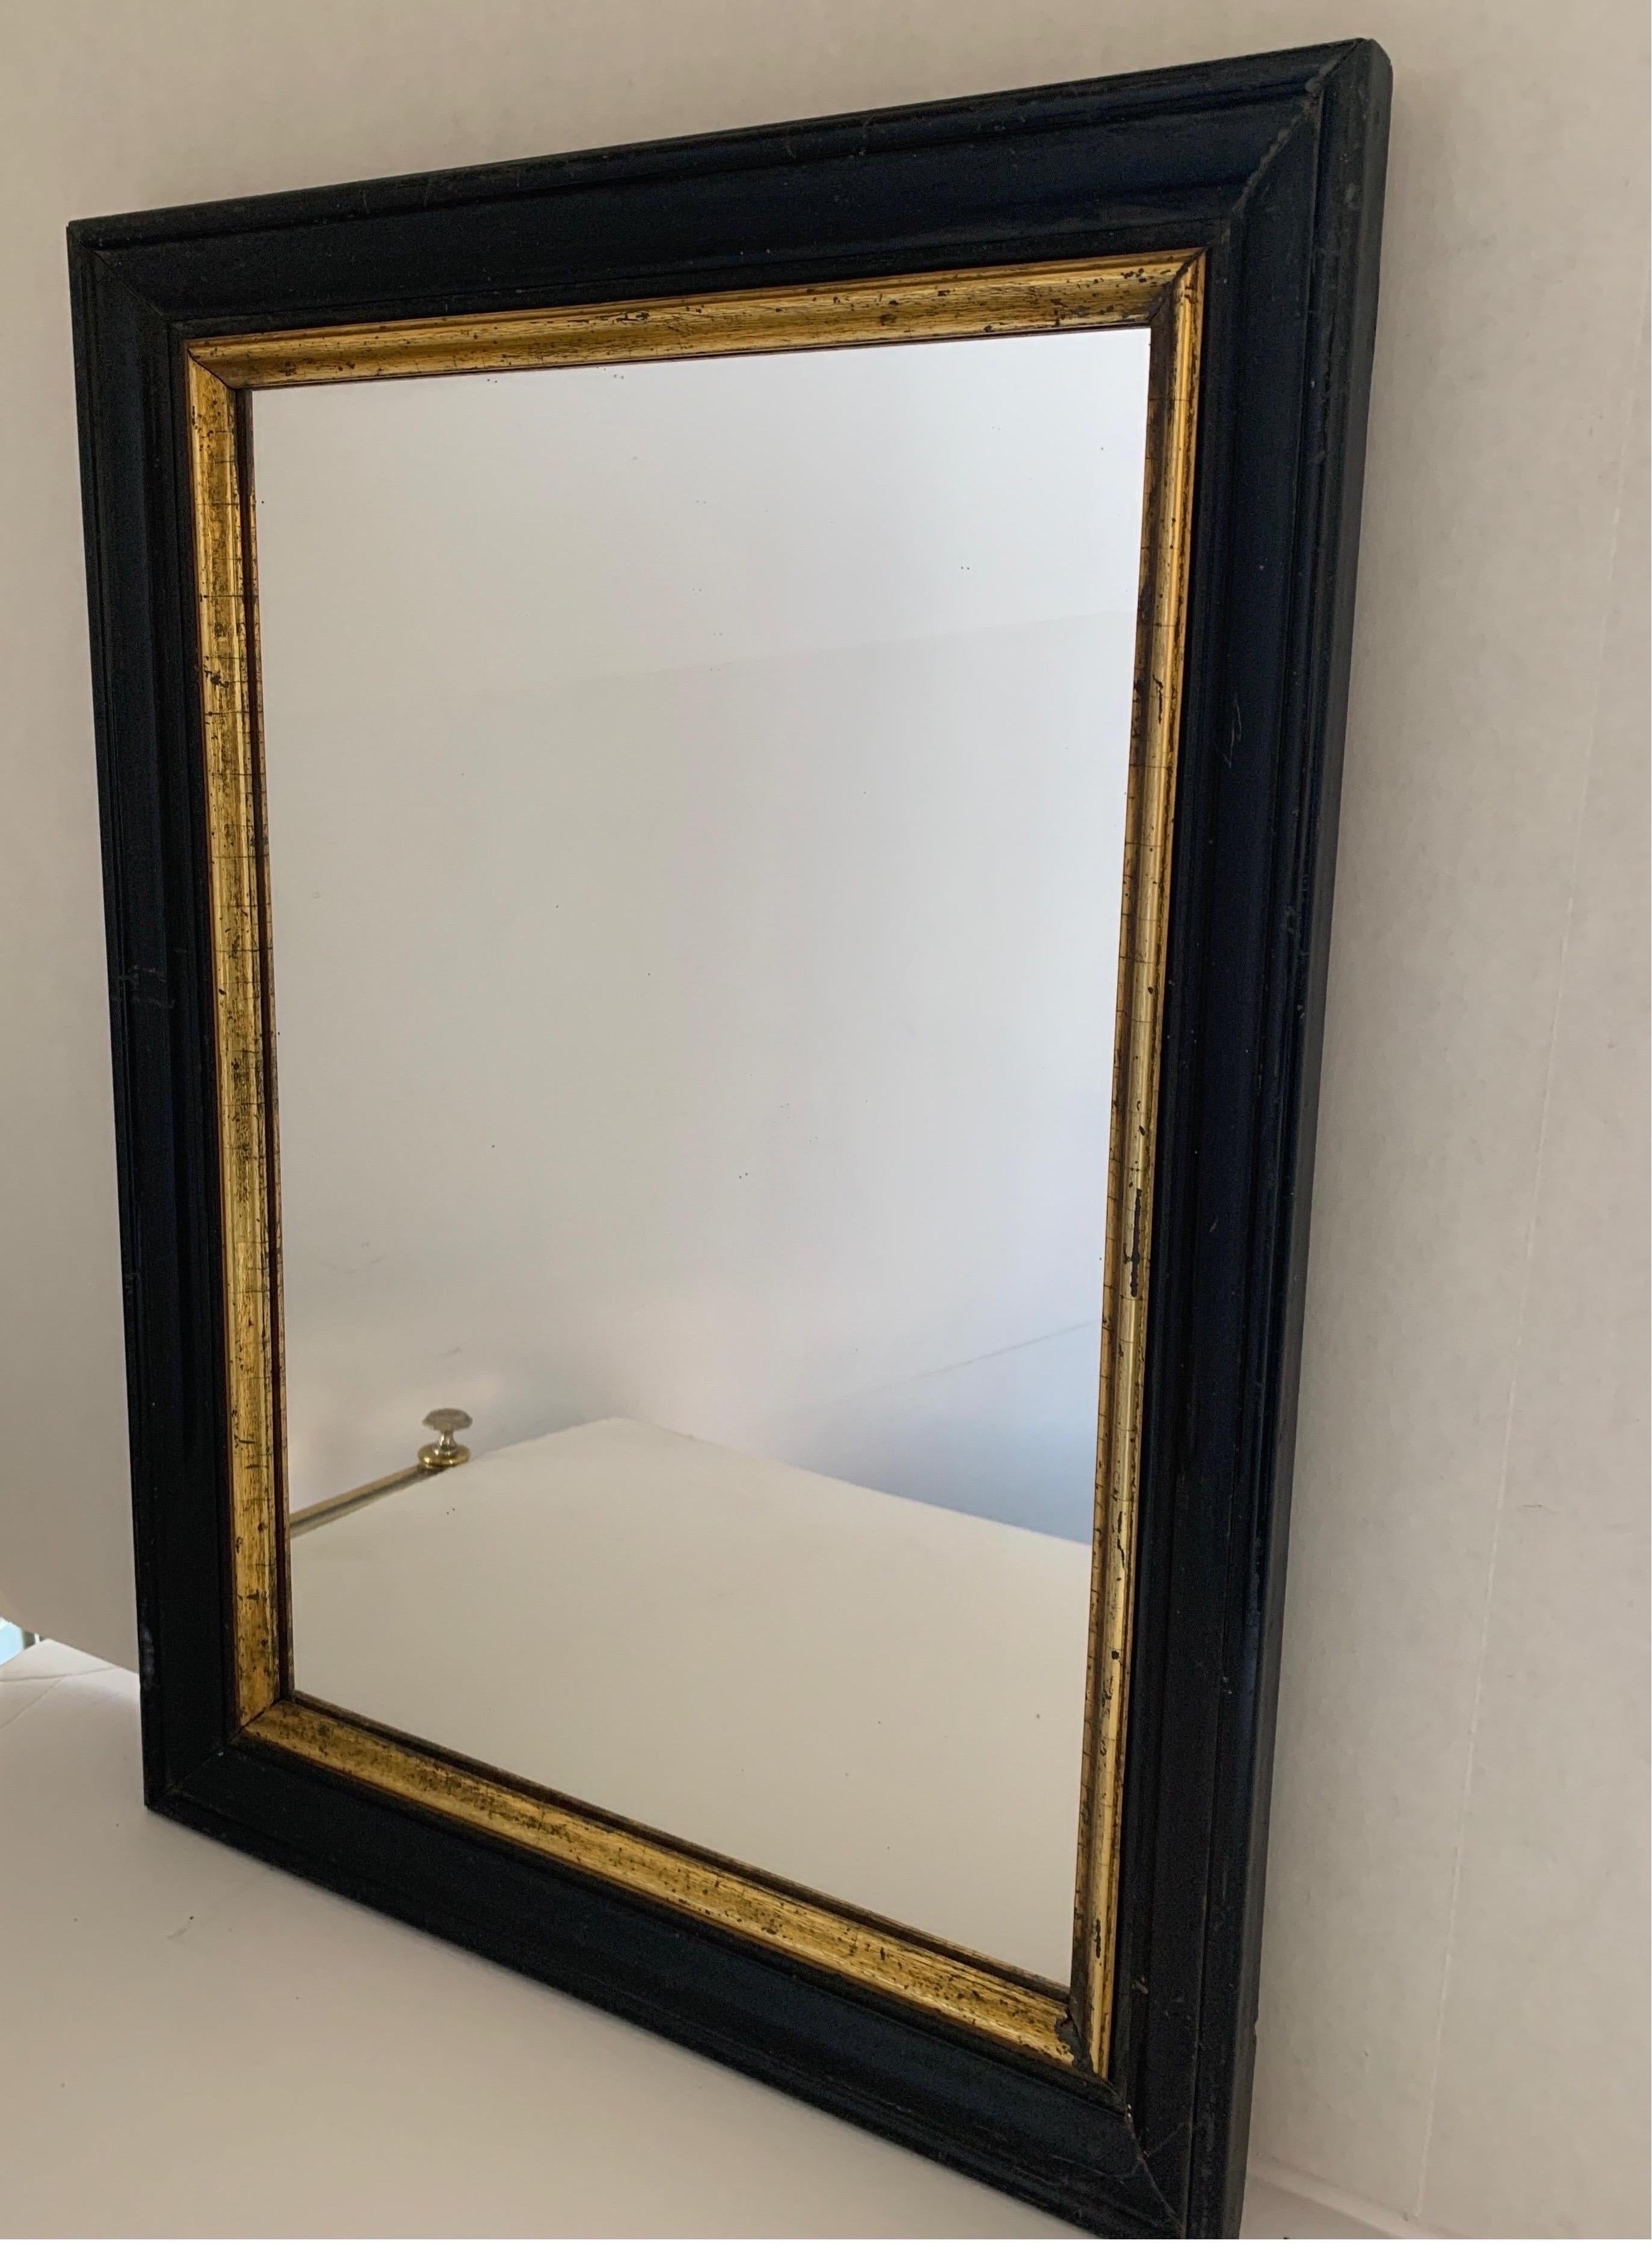 This was originally for a painting as indicated on the back. It is common to change the art to mirror. The mirror is an old mirror but in very good condition without too many blemishes.